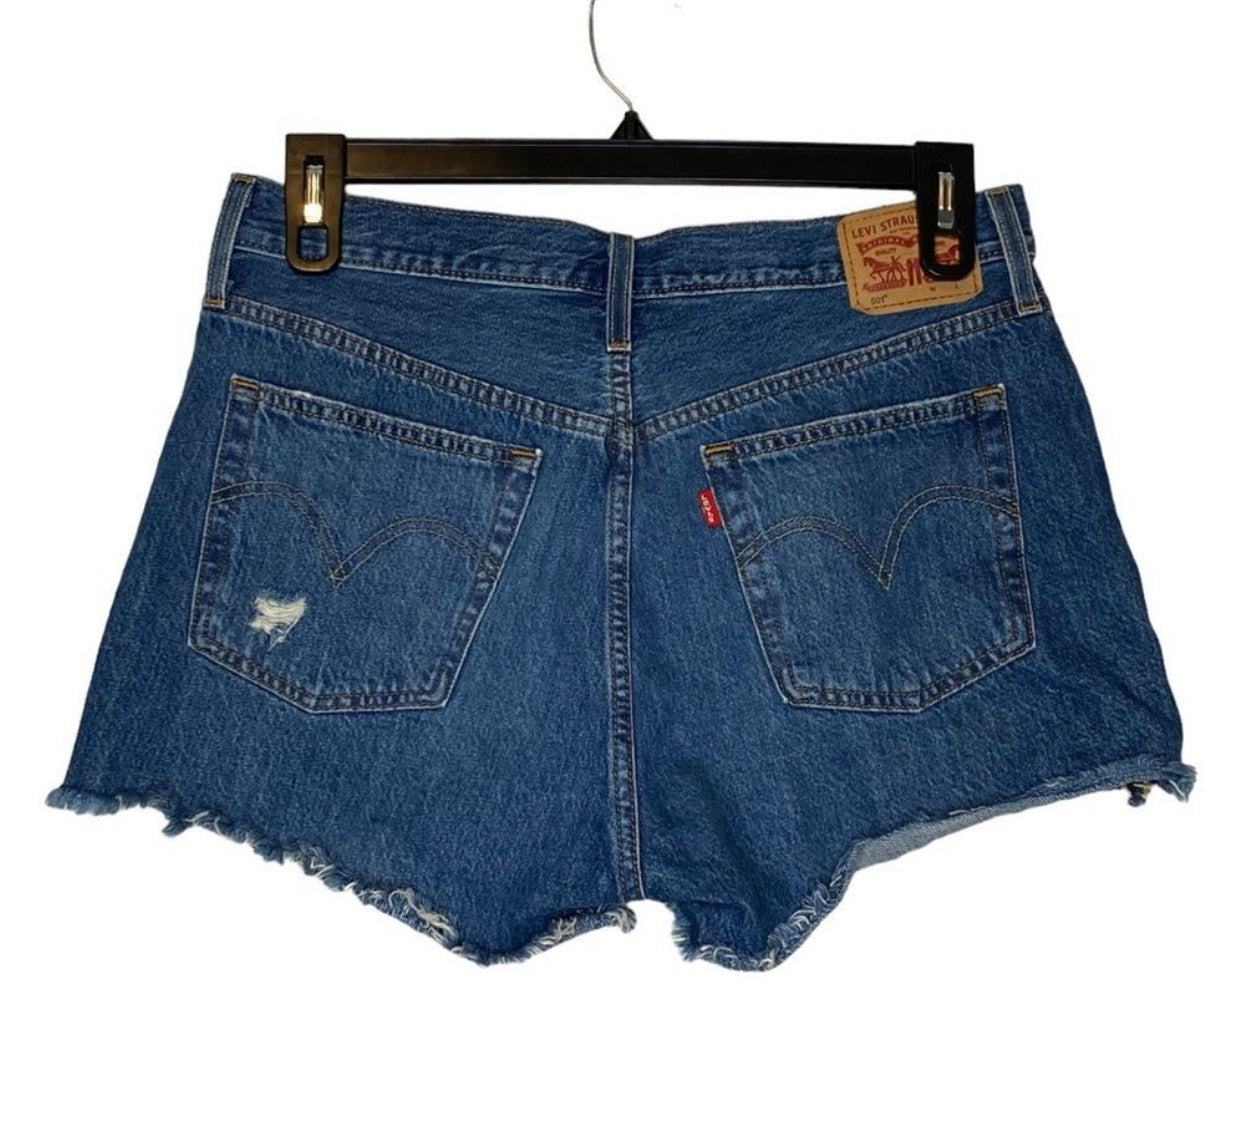 Levis 501 Button Fly Cut Off Jean Shorts - Size 31